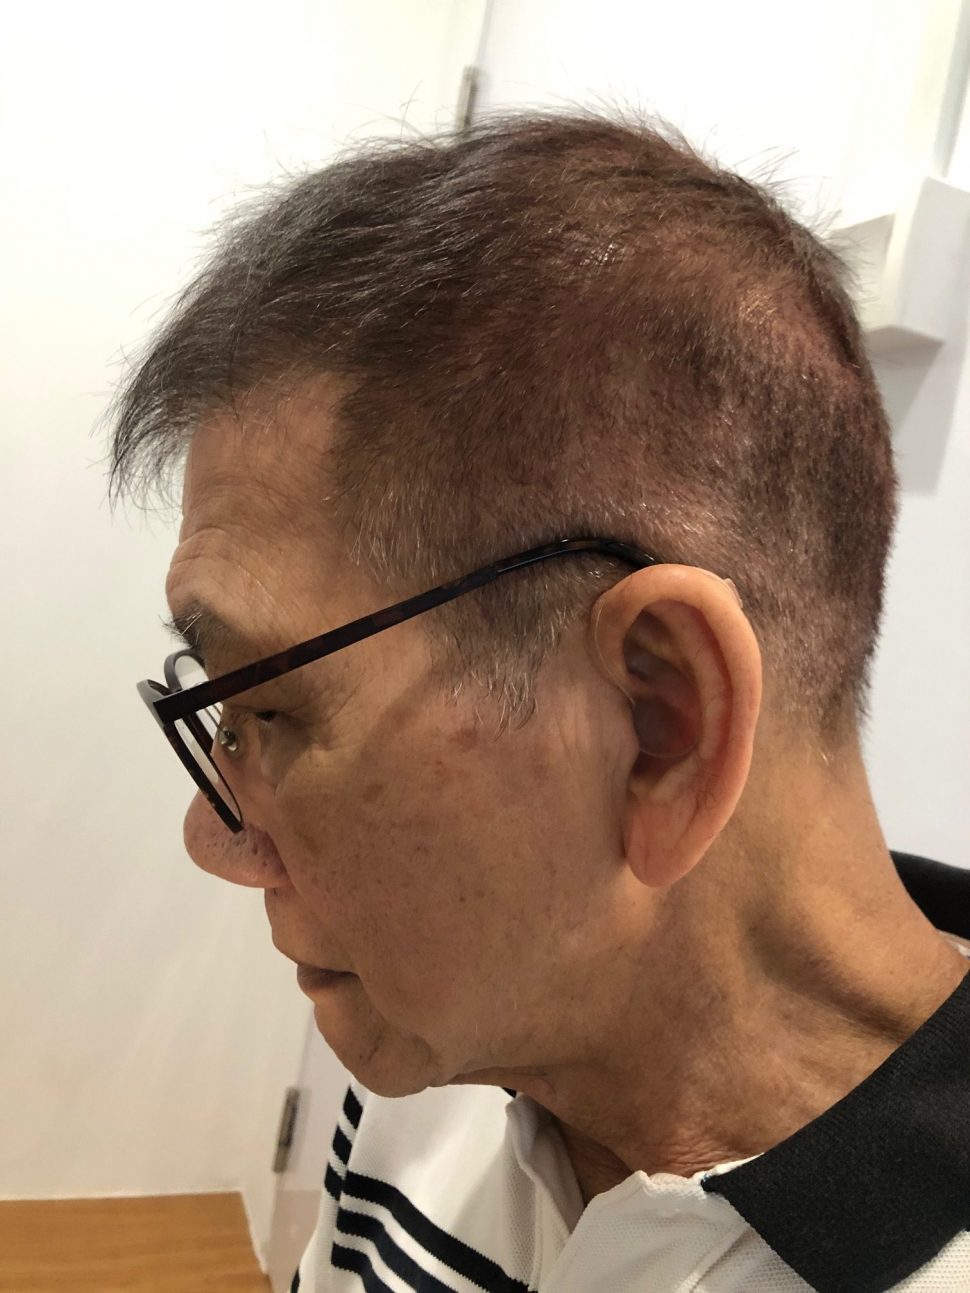 Mr Lee Customer with Quattro hearing aids